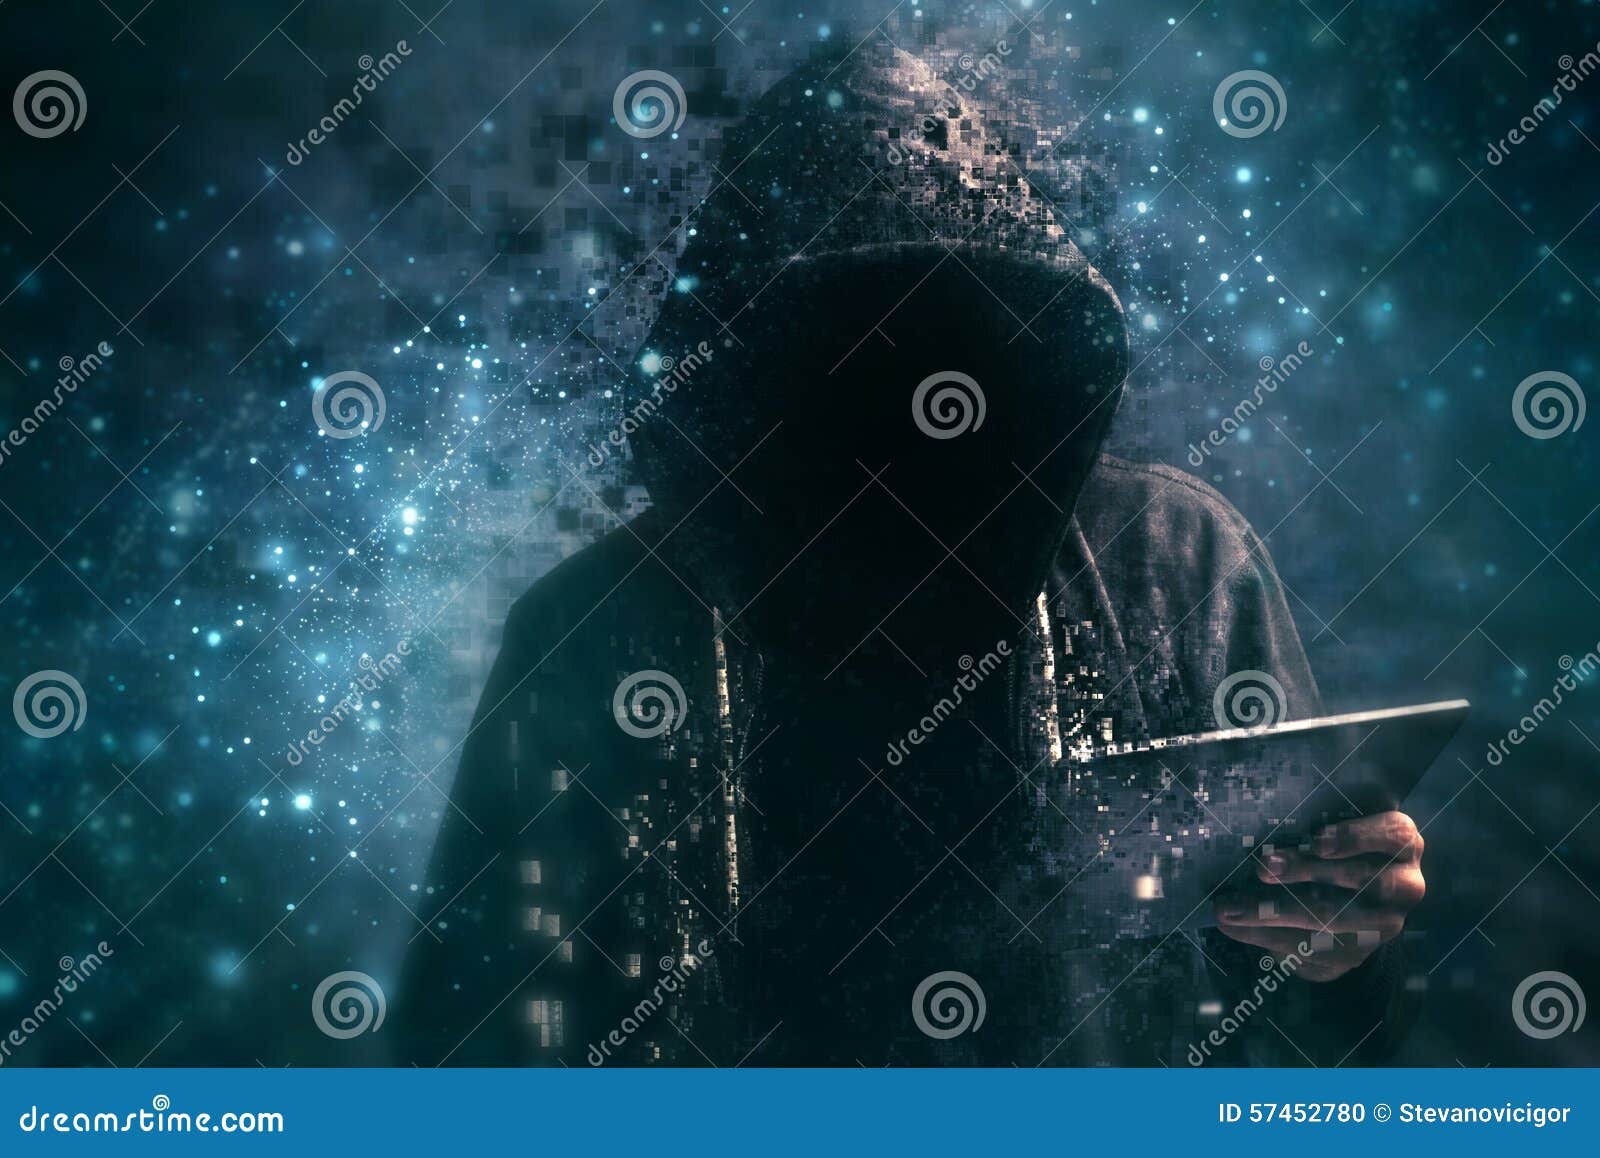 pixelated unrecognizable hooded cyber criminal